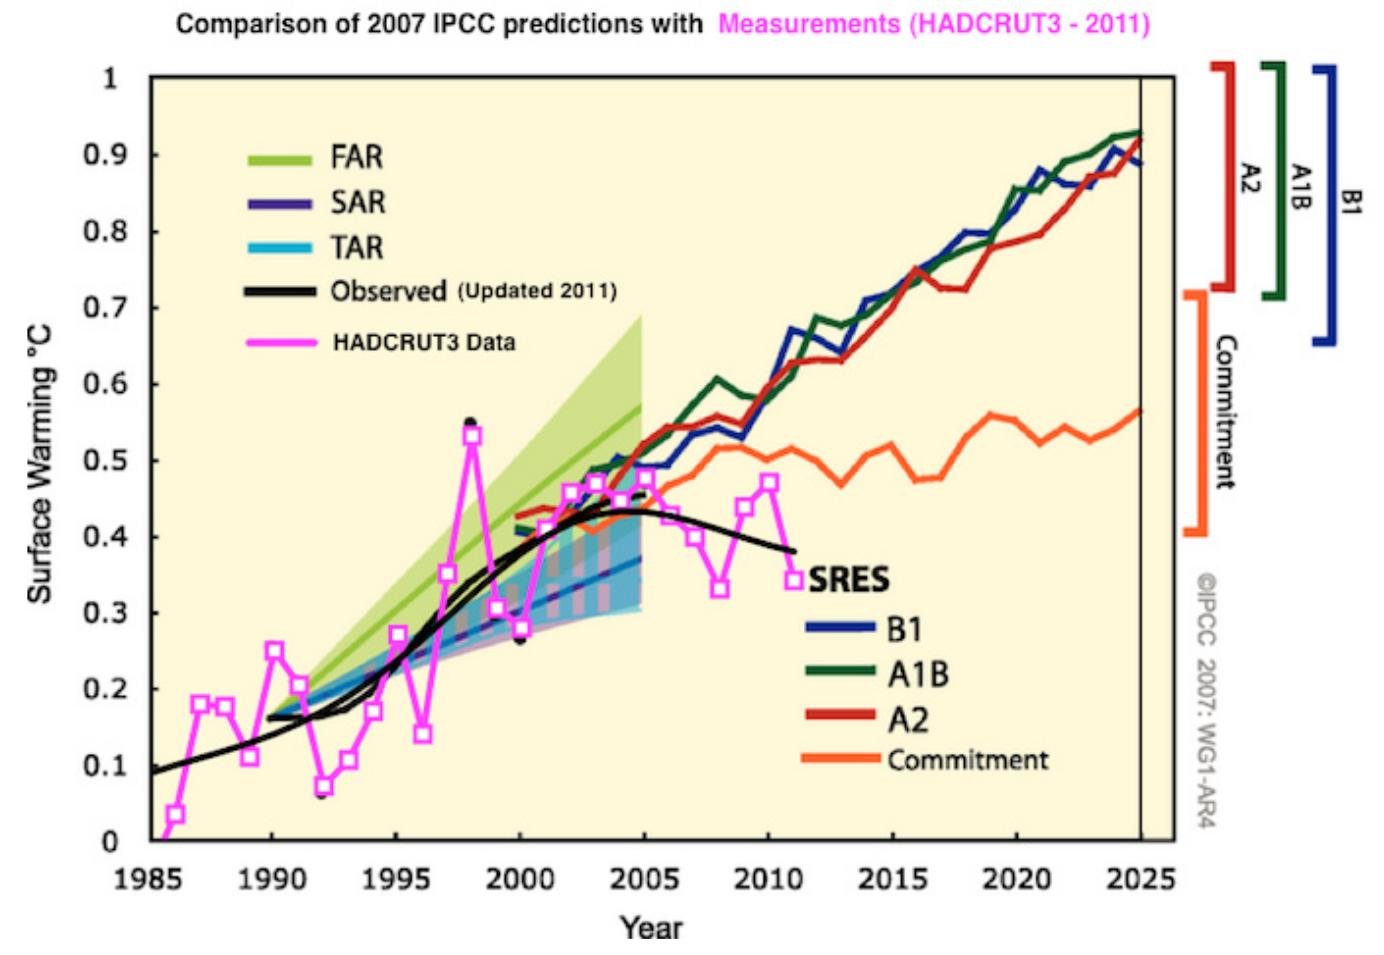  Warming as predicted by the IPCC vs. observed cooling.